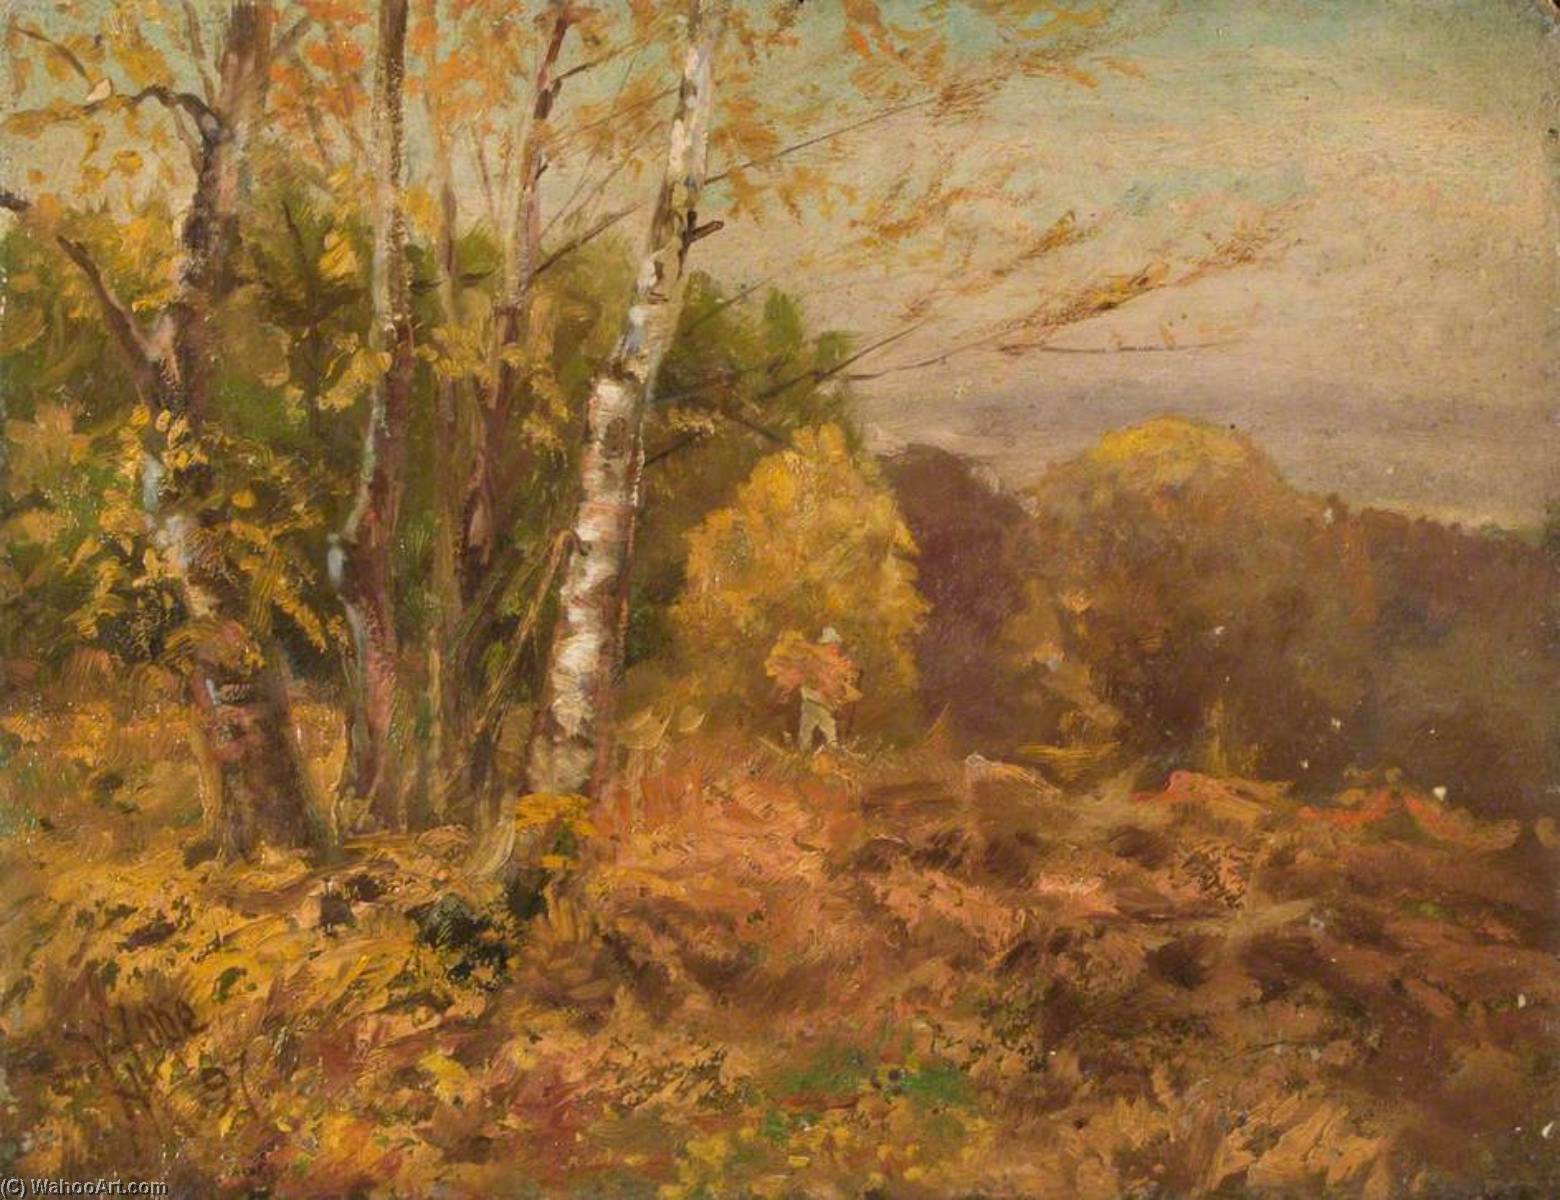 Order Paintings Reproductions Gathering Straw, 1891 by William Henry Hope (1835-1917) | ArtsDot.com